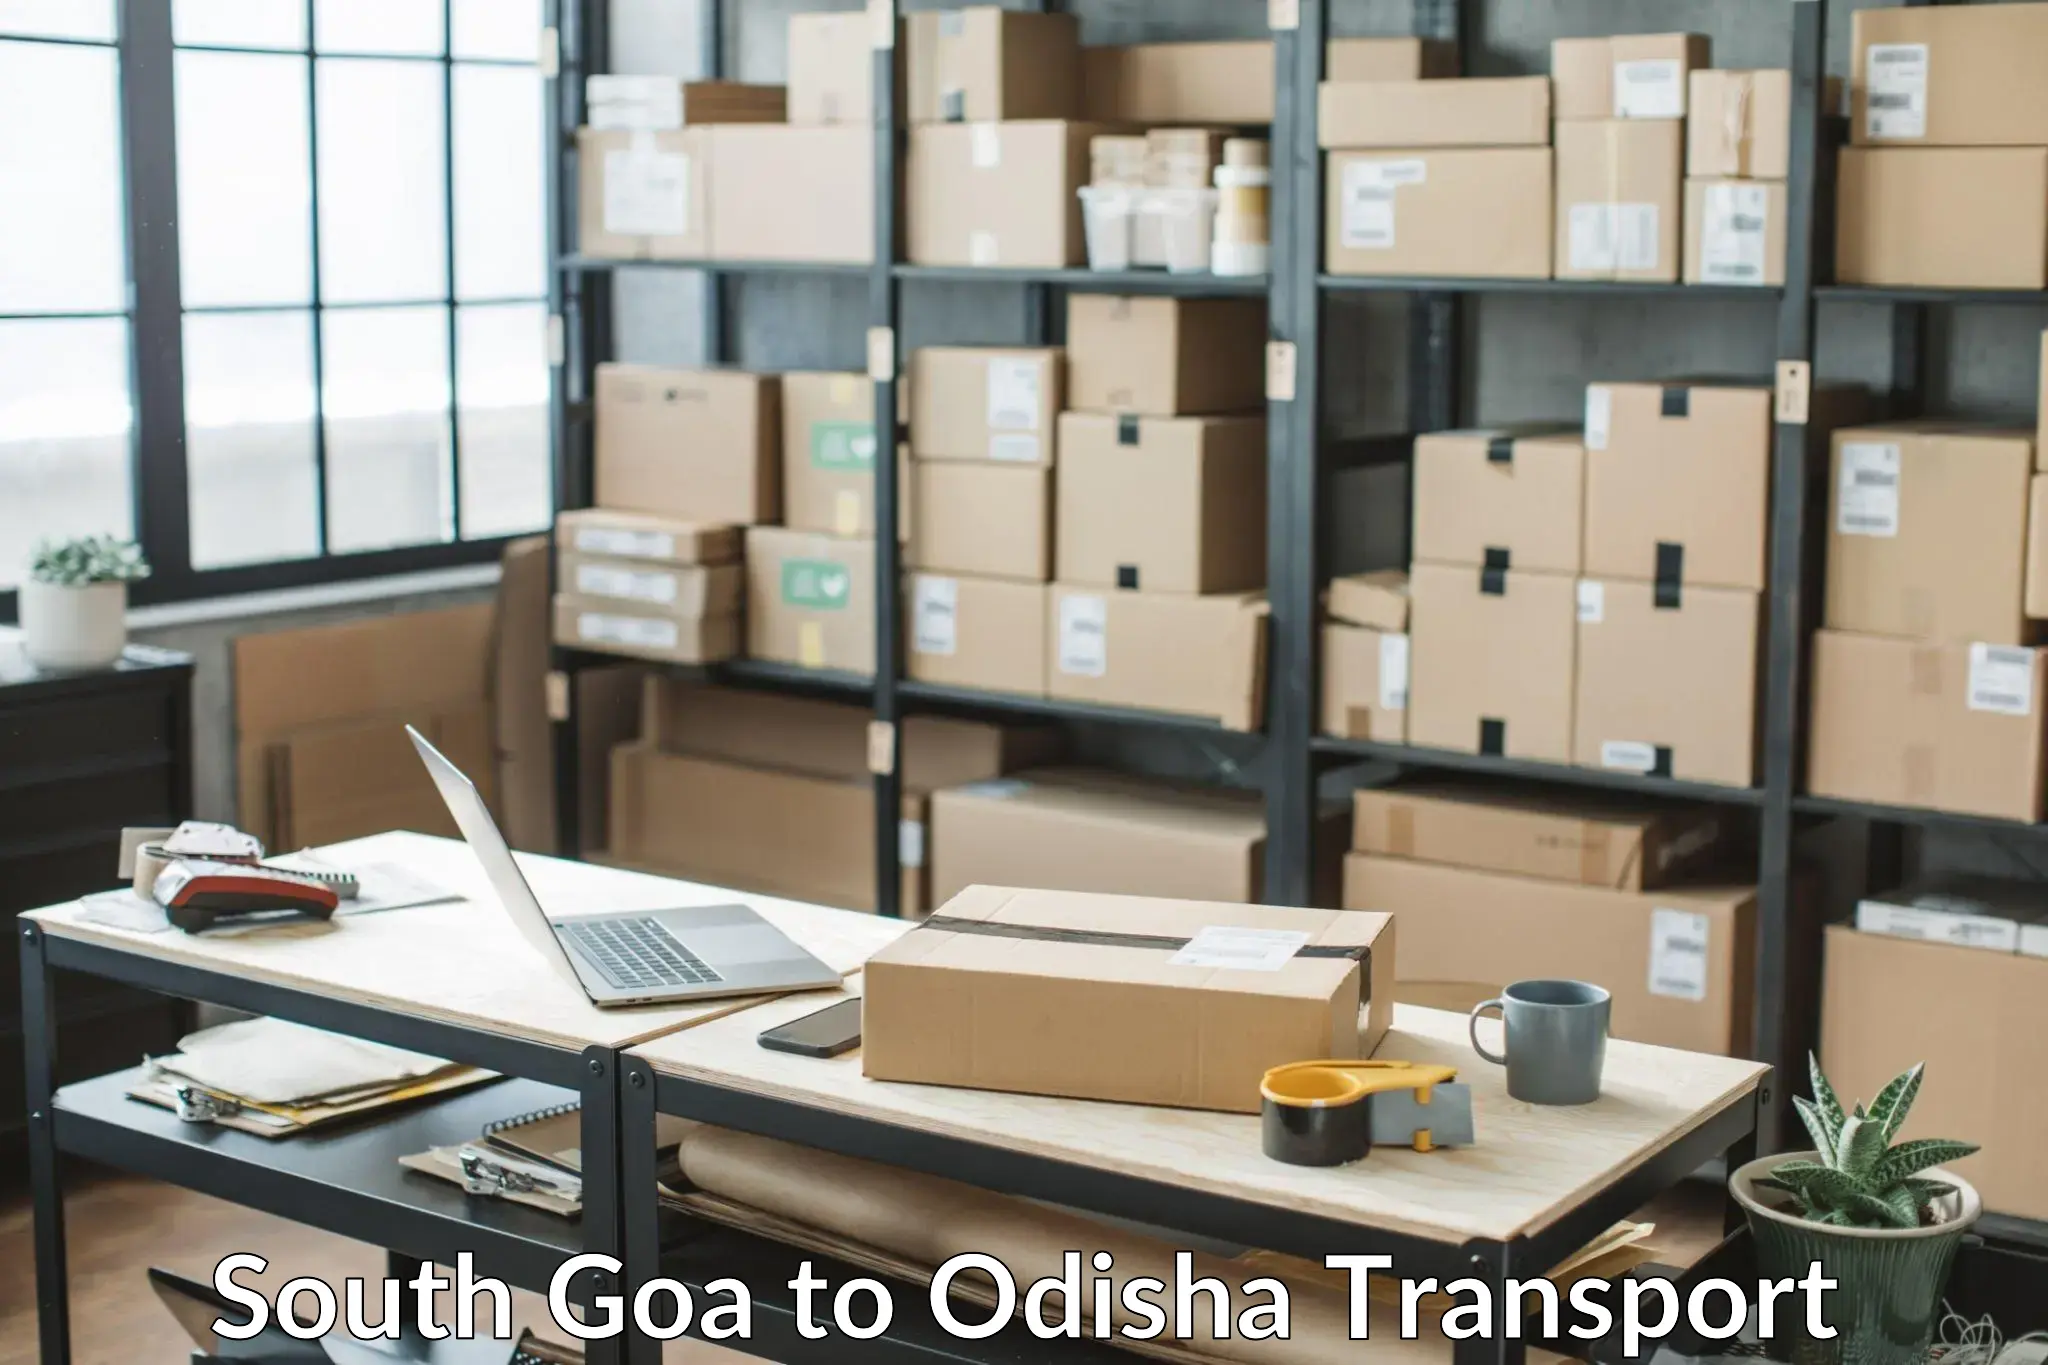 Transport in sharing in South Goa to Swampatna